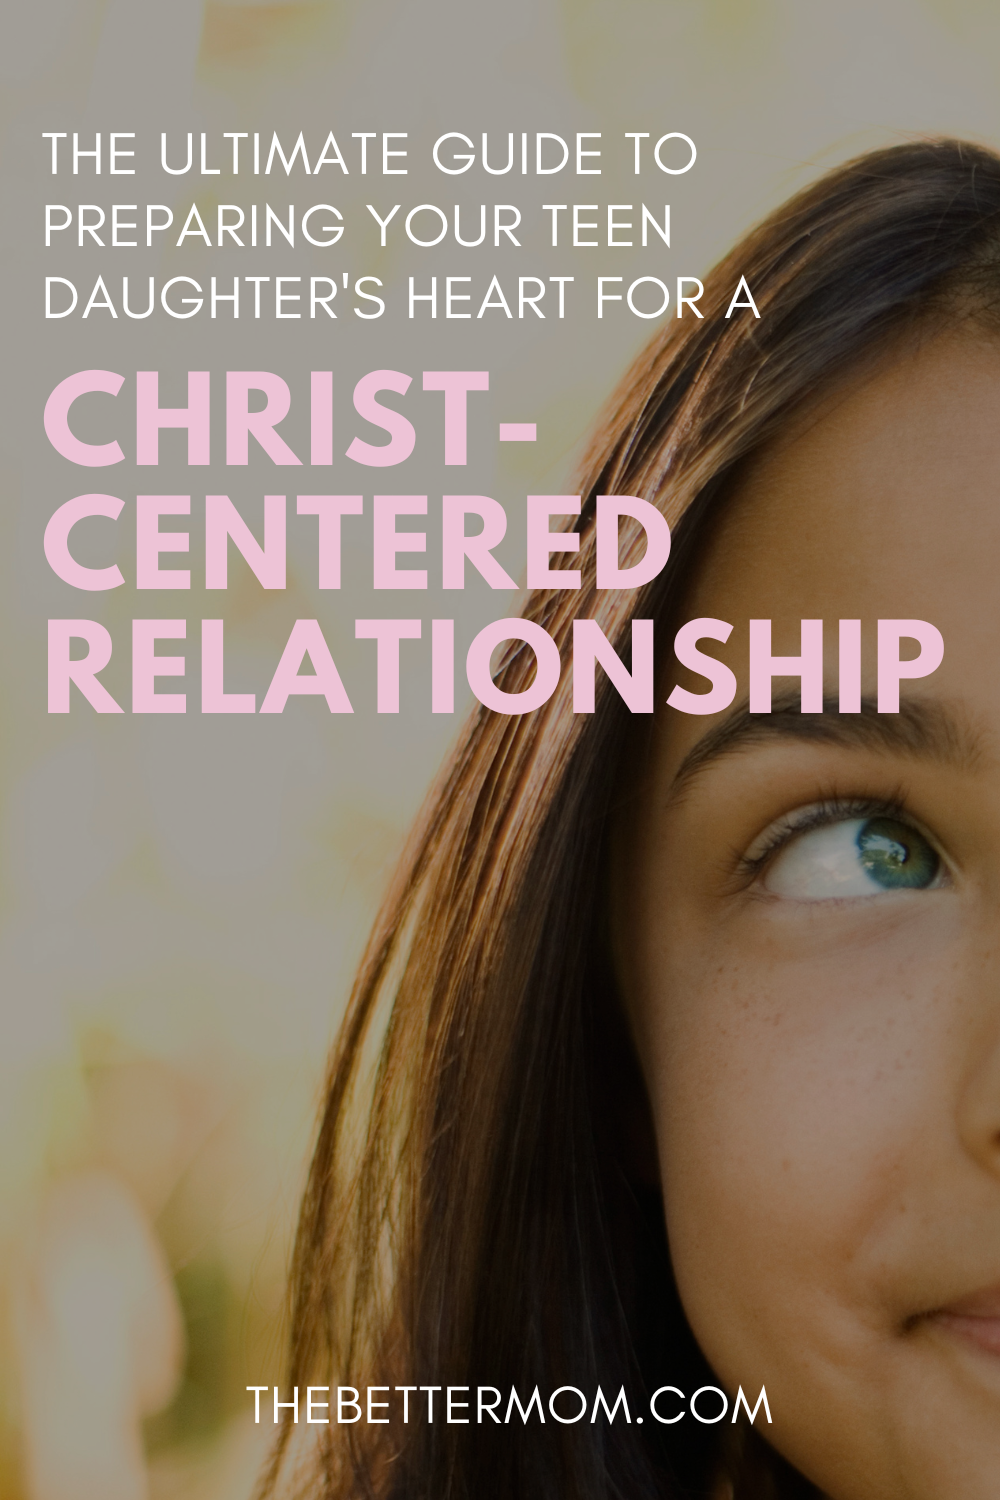 The Ultimate Guide to Preparing Your Teen Daughter’s Heart for a Christ-Centered Relationship — The Better Mom